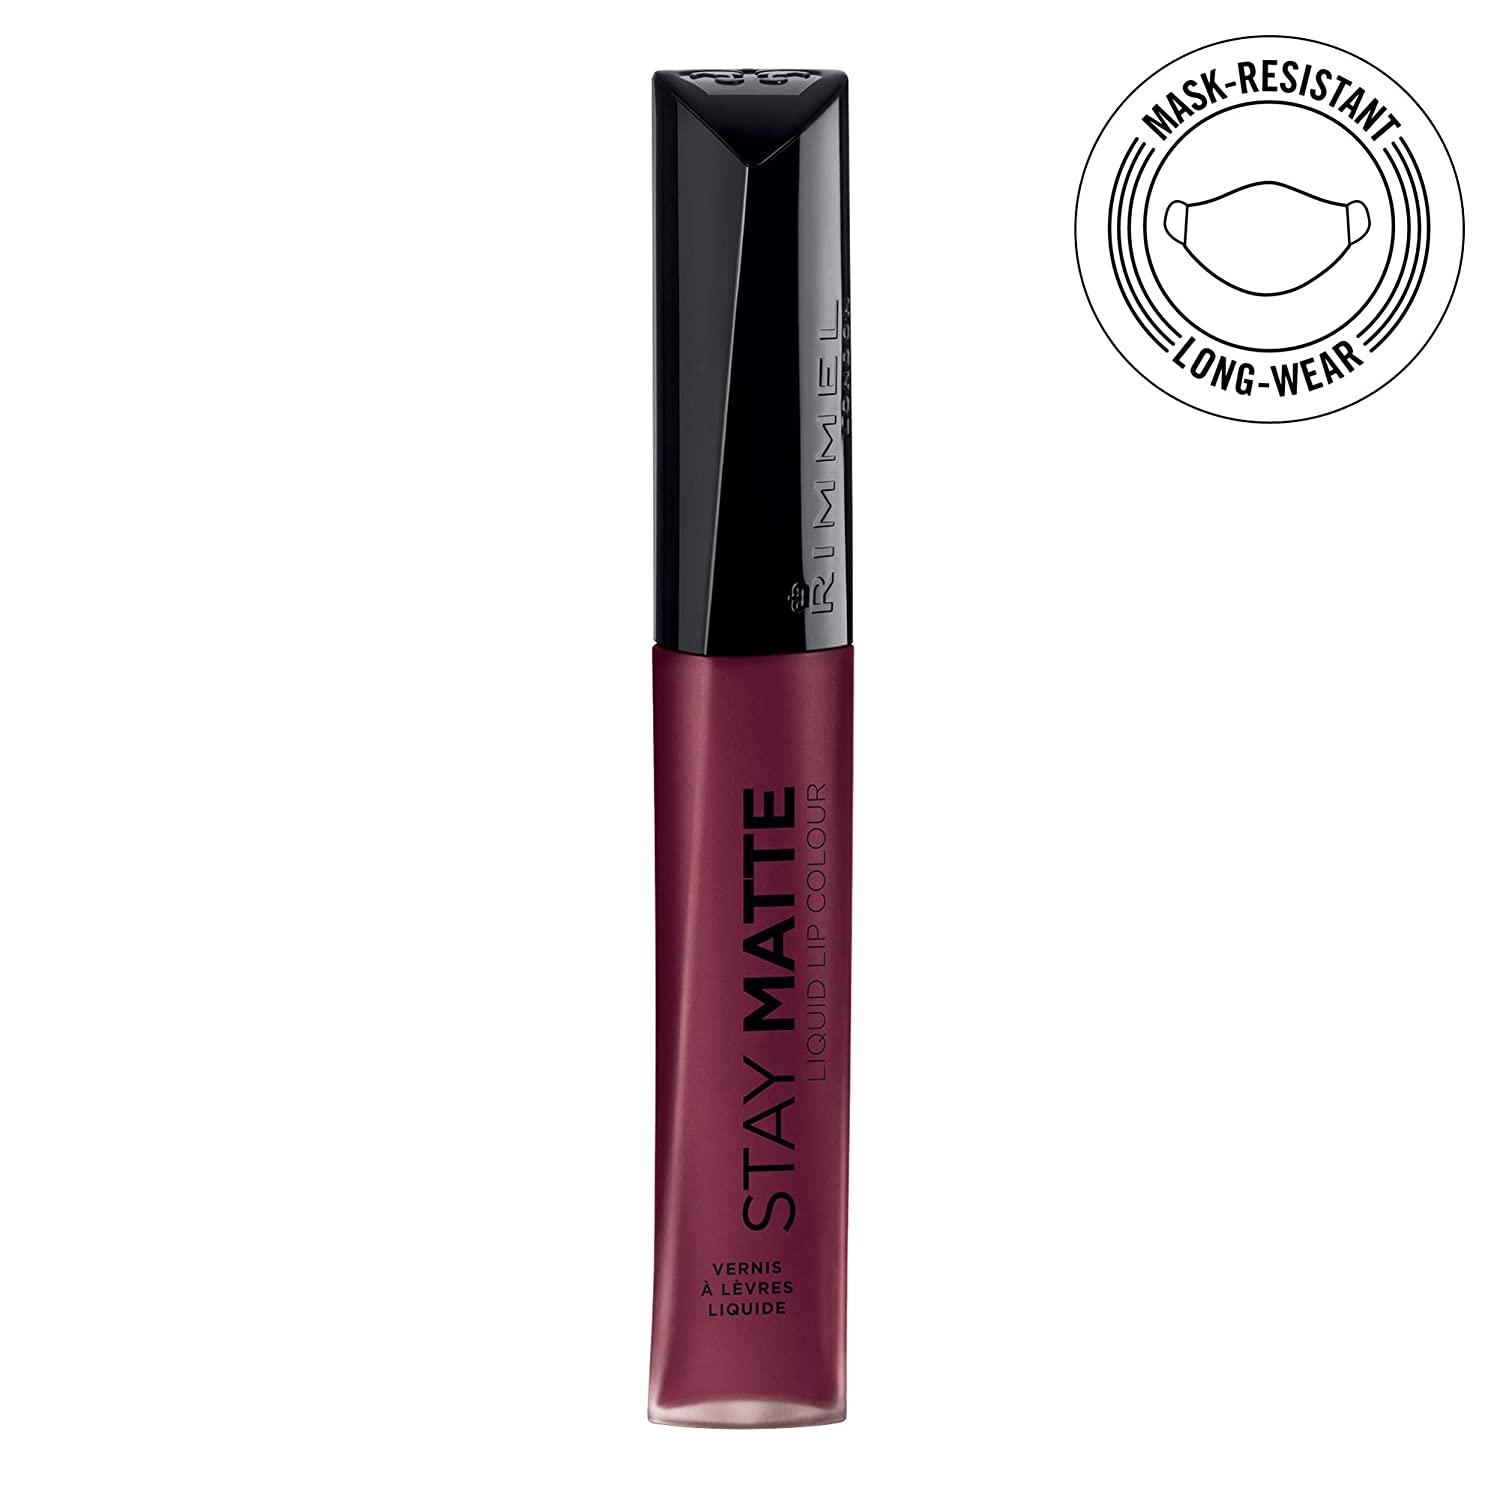 0.21-Oz Rimmel Stay Matte Liquid Lip Colour (Plum This Show or Trust You) $1.12 w/ S&S + Free Shipping w/ Prime or $25+